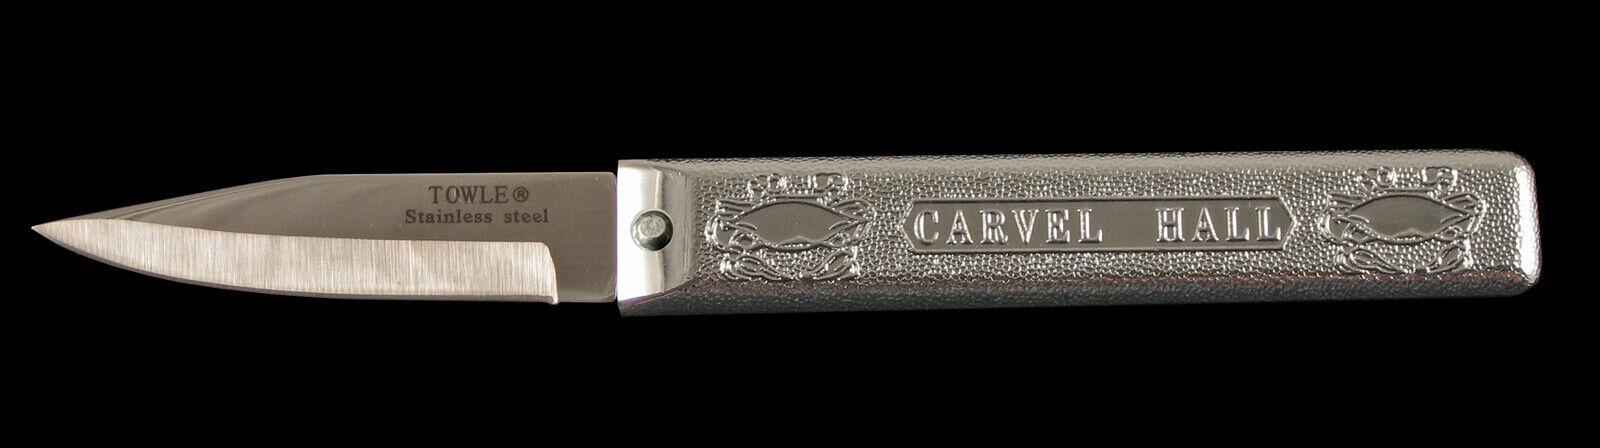 Carvel Hall Crab Knife - New Stock - Steamed Crabs Picking - Maryland - Paring